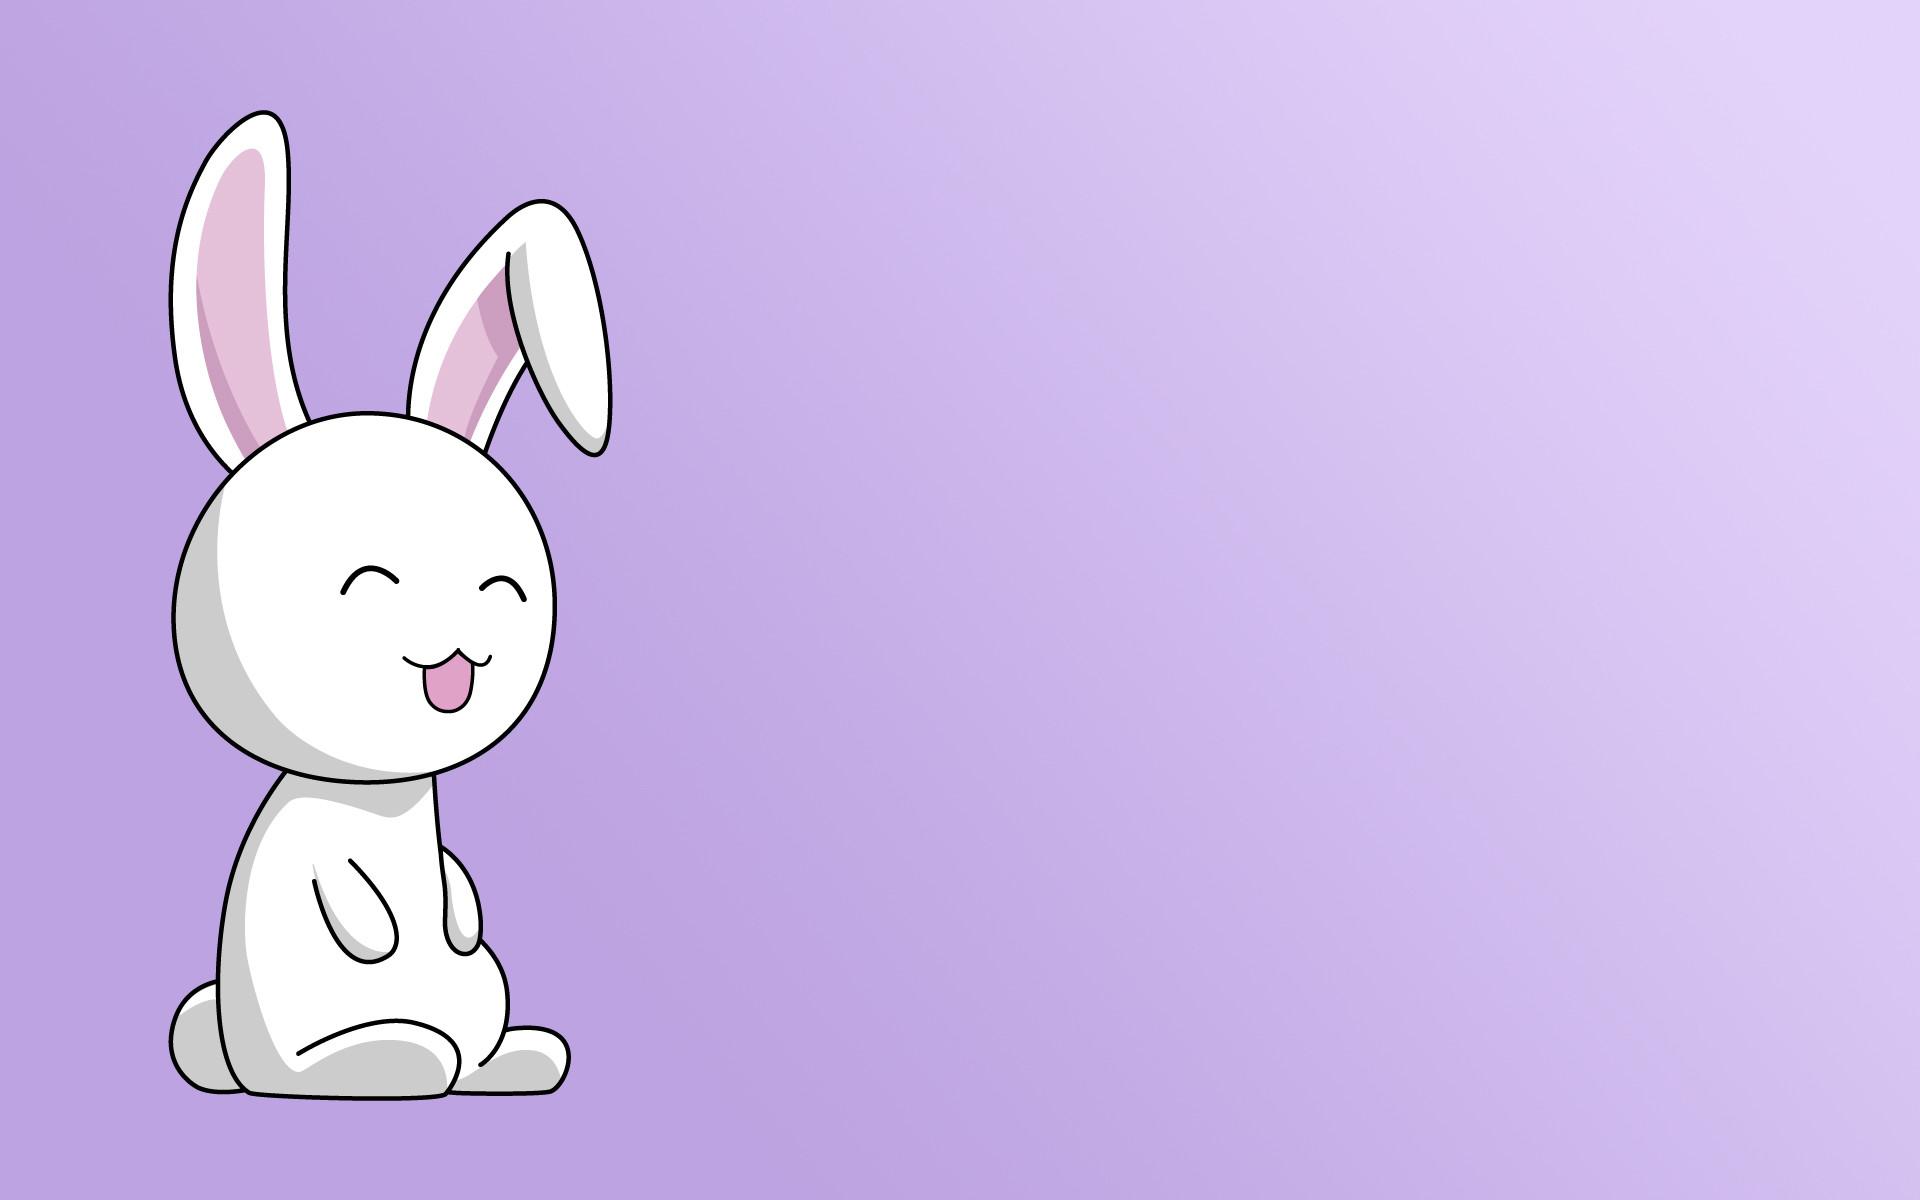 Bugs Bunny Wallpaper for Computer